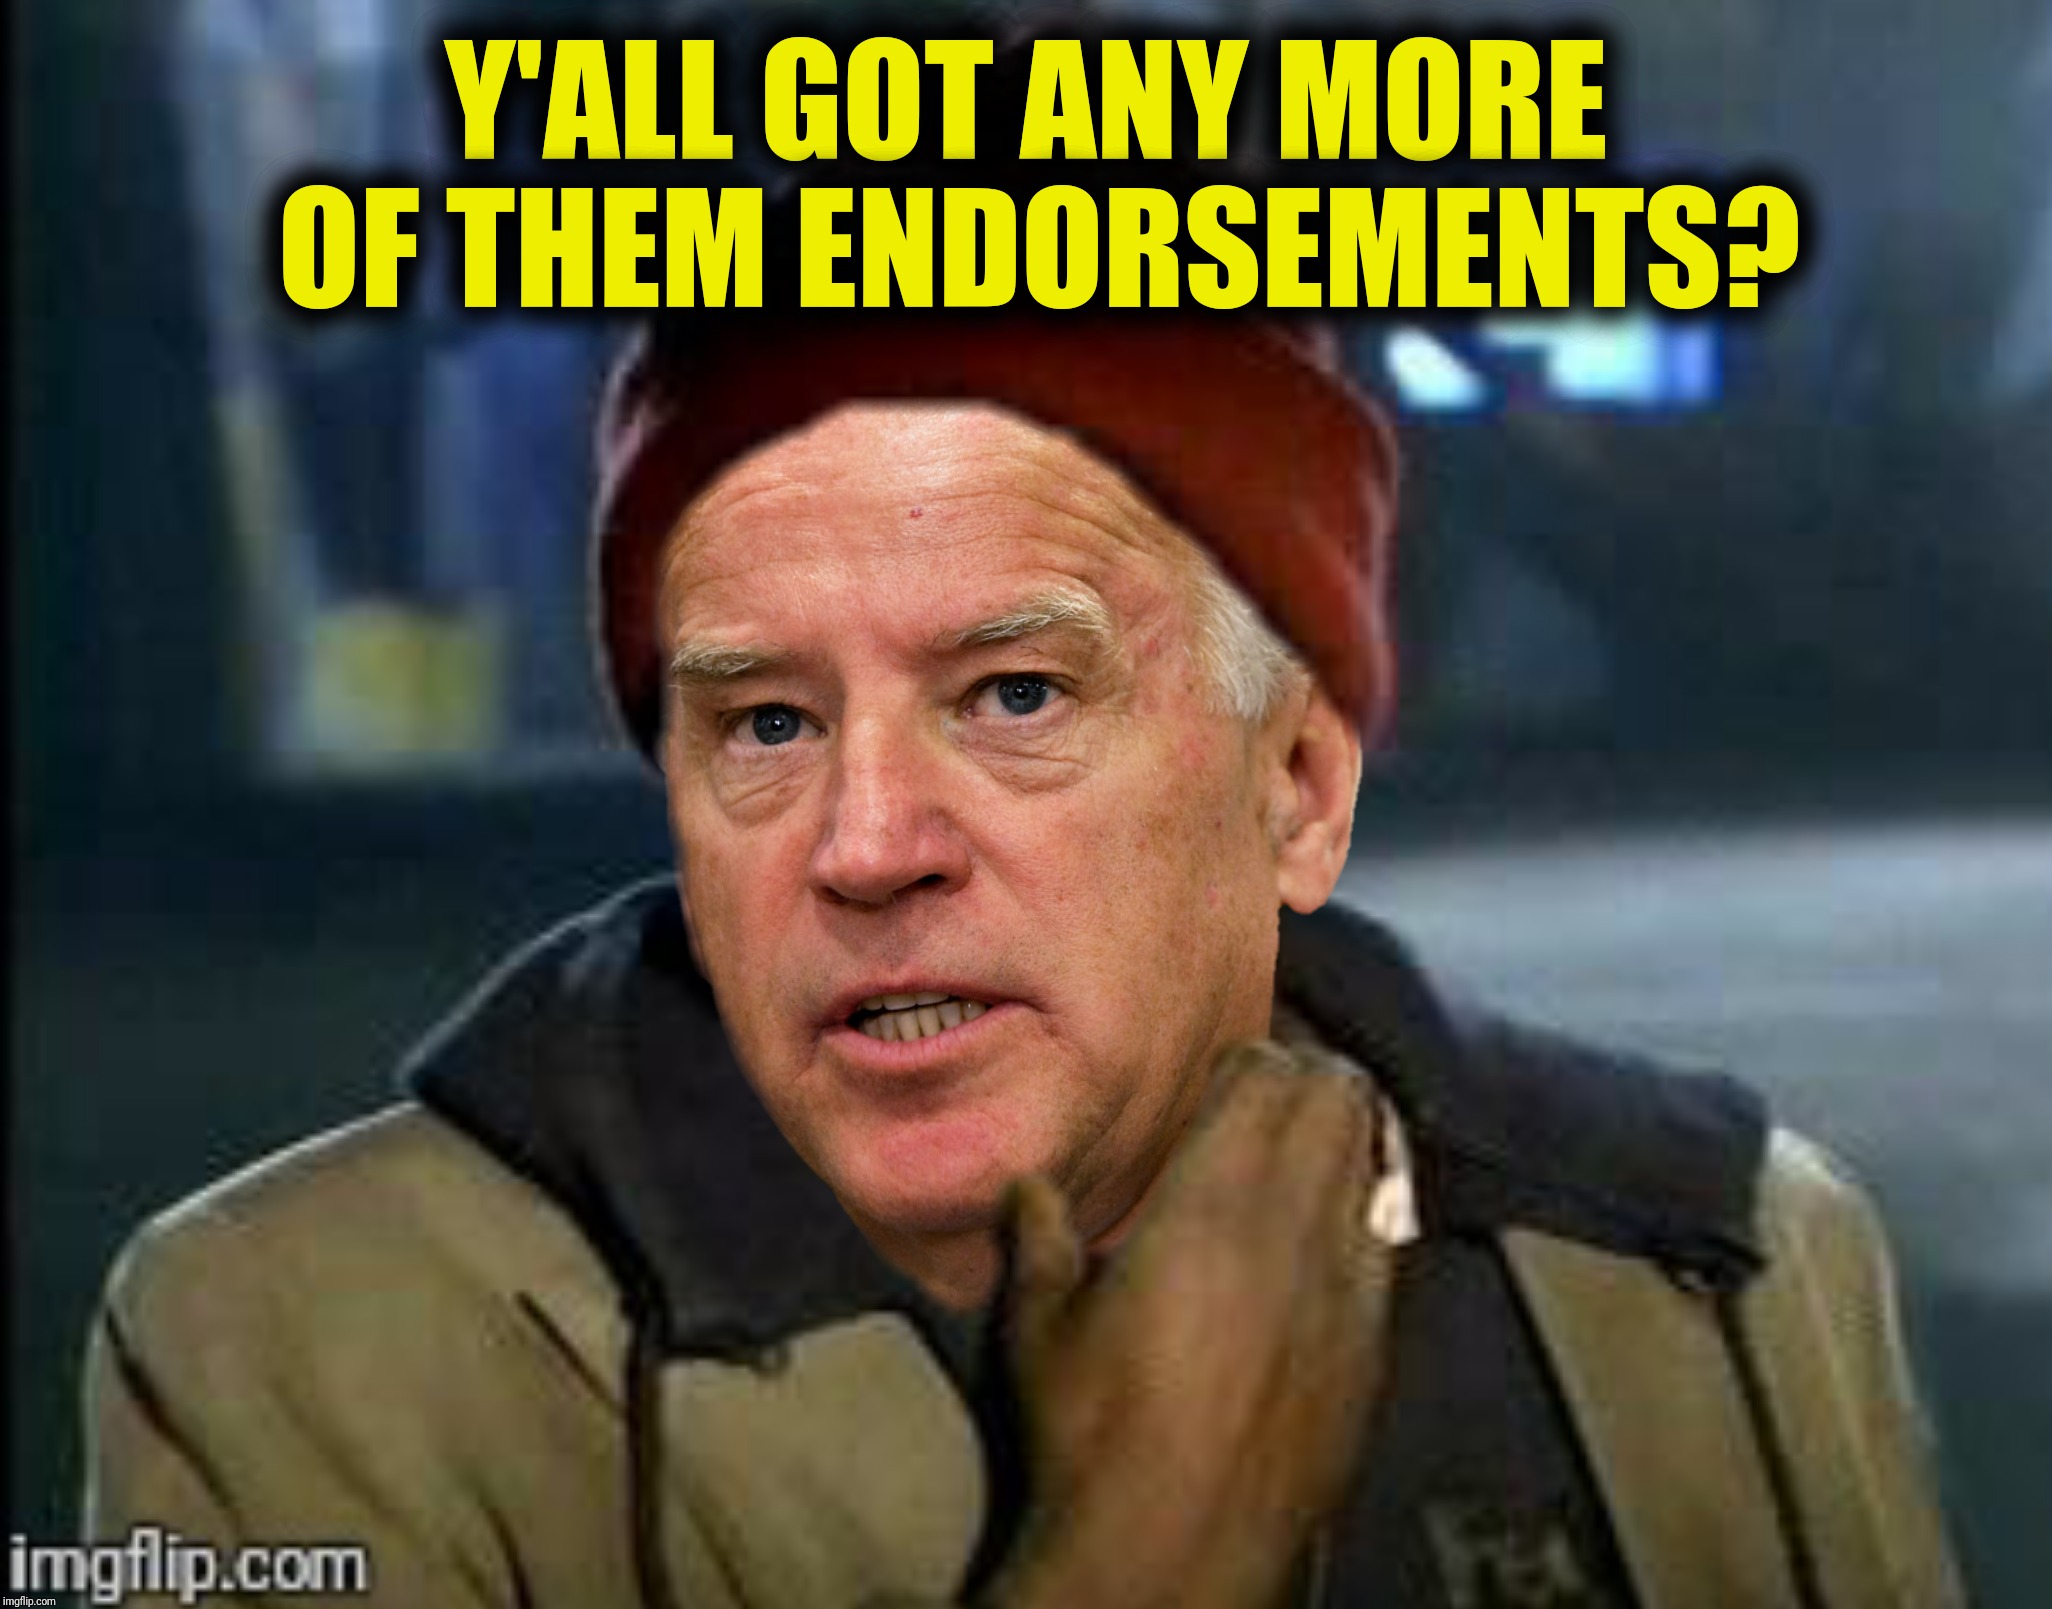 Bad Photoshop Sunday presents:  Brother can you spare an endorsement? | Y'ALL GOT ANY MORE OF THEM ENDORSEMENTS? | image tagged in bad photoshop sunday,y'all got any more of them,joe biden,endorsements | made w/ Imgflip meme maker